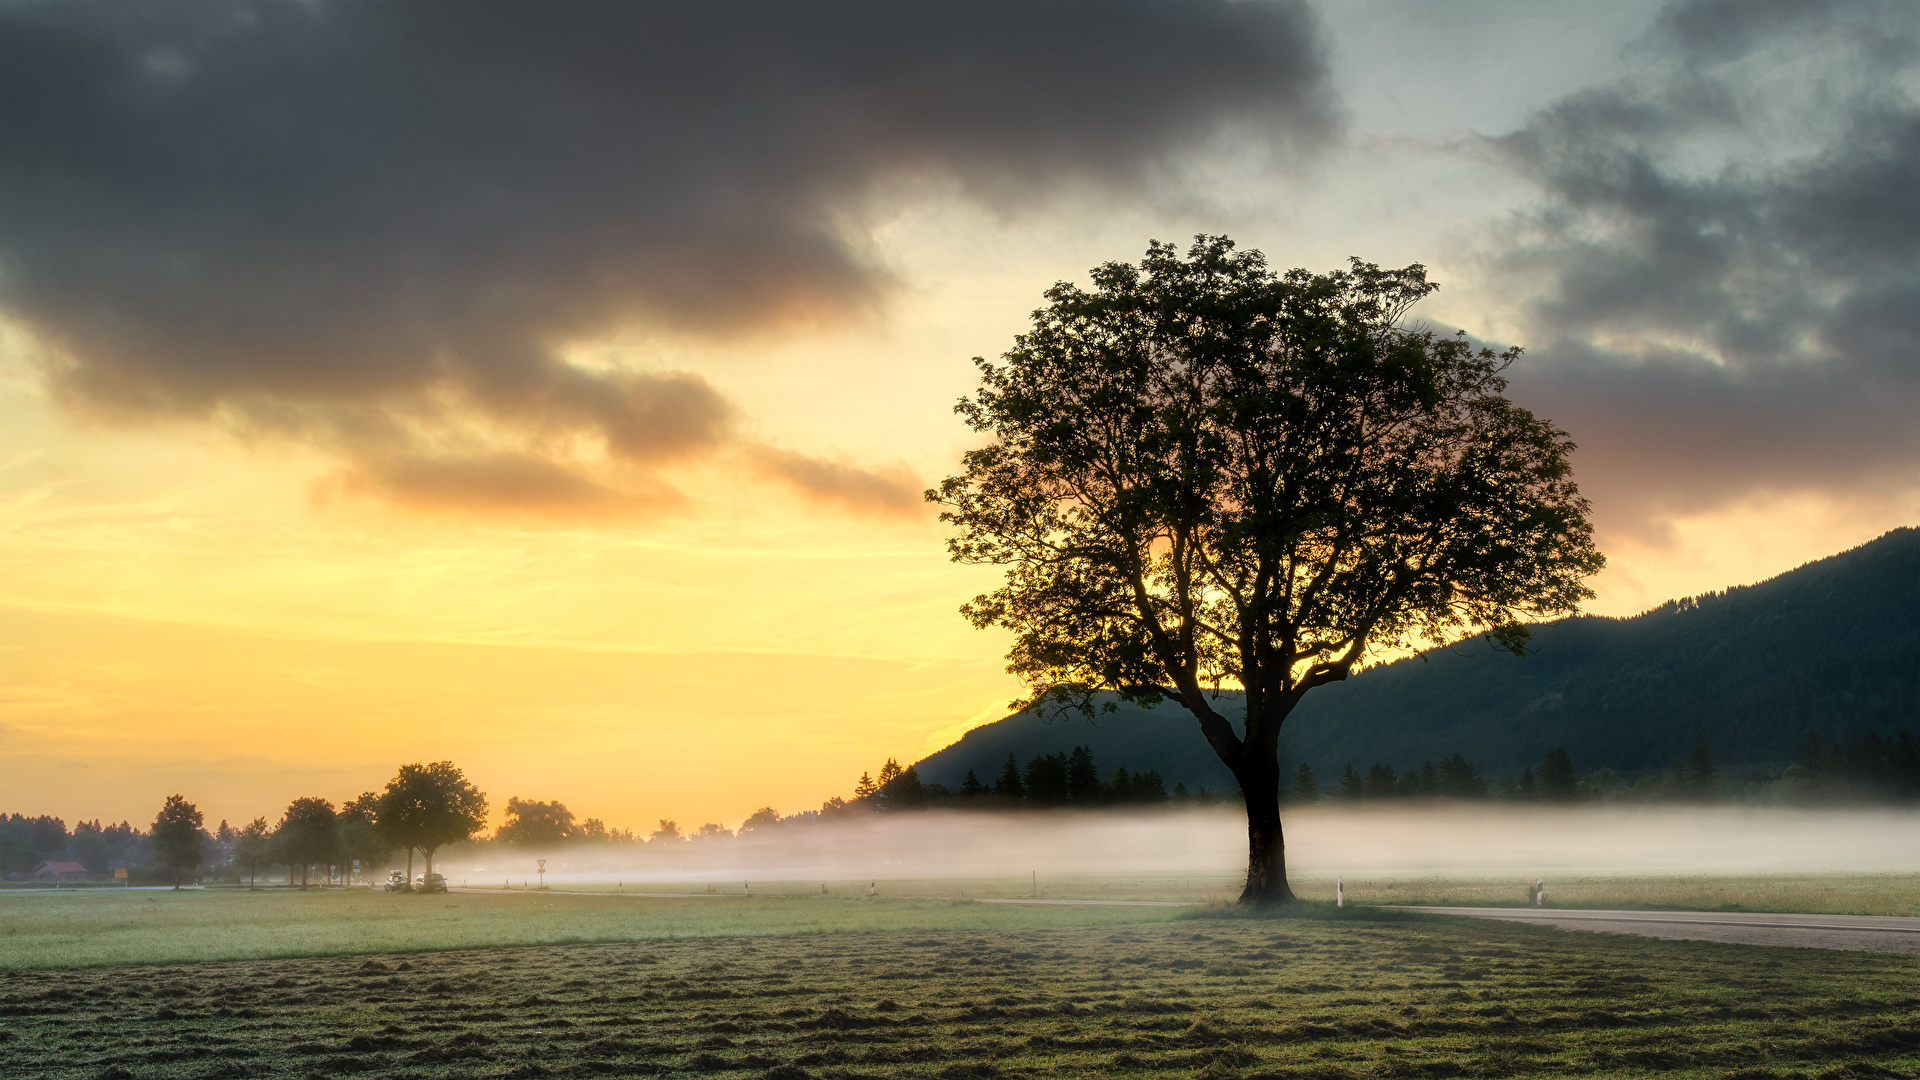 A lone tree in a field of morning fog